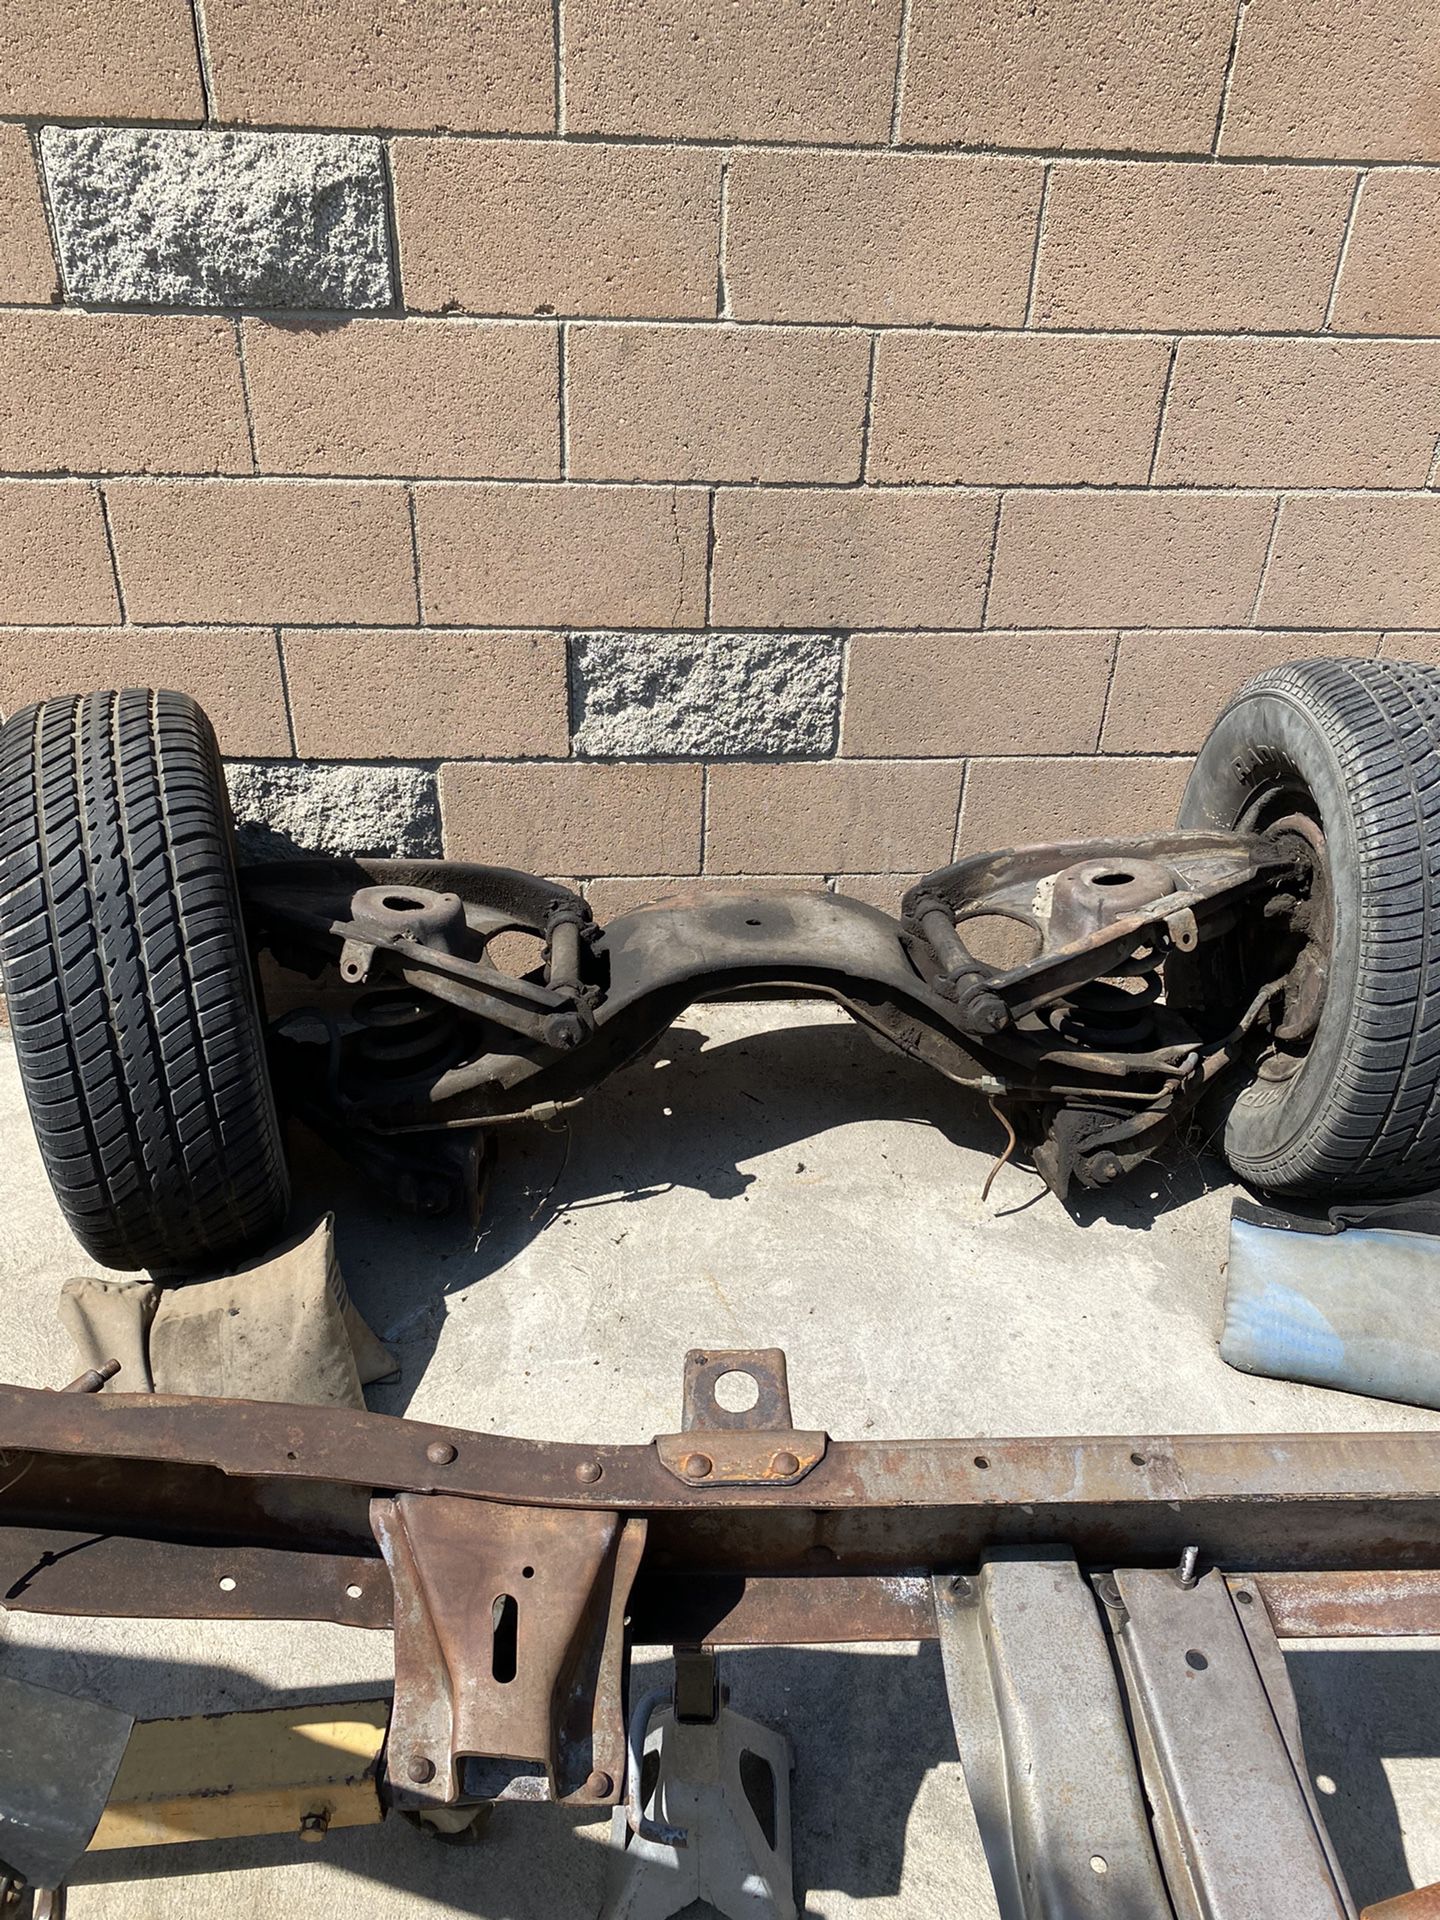 Chevy C10 64’ Parts (make offer)